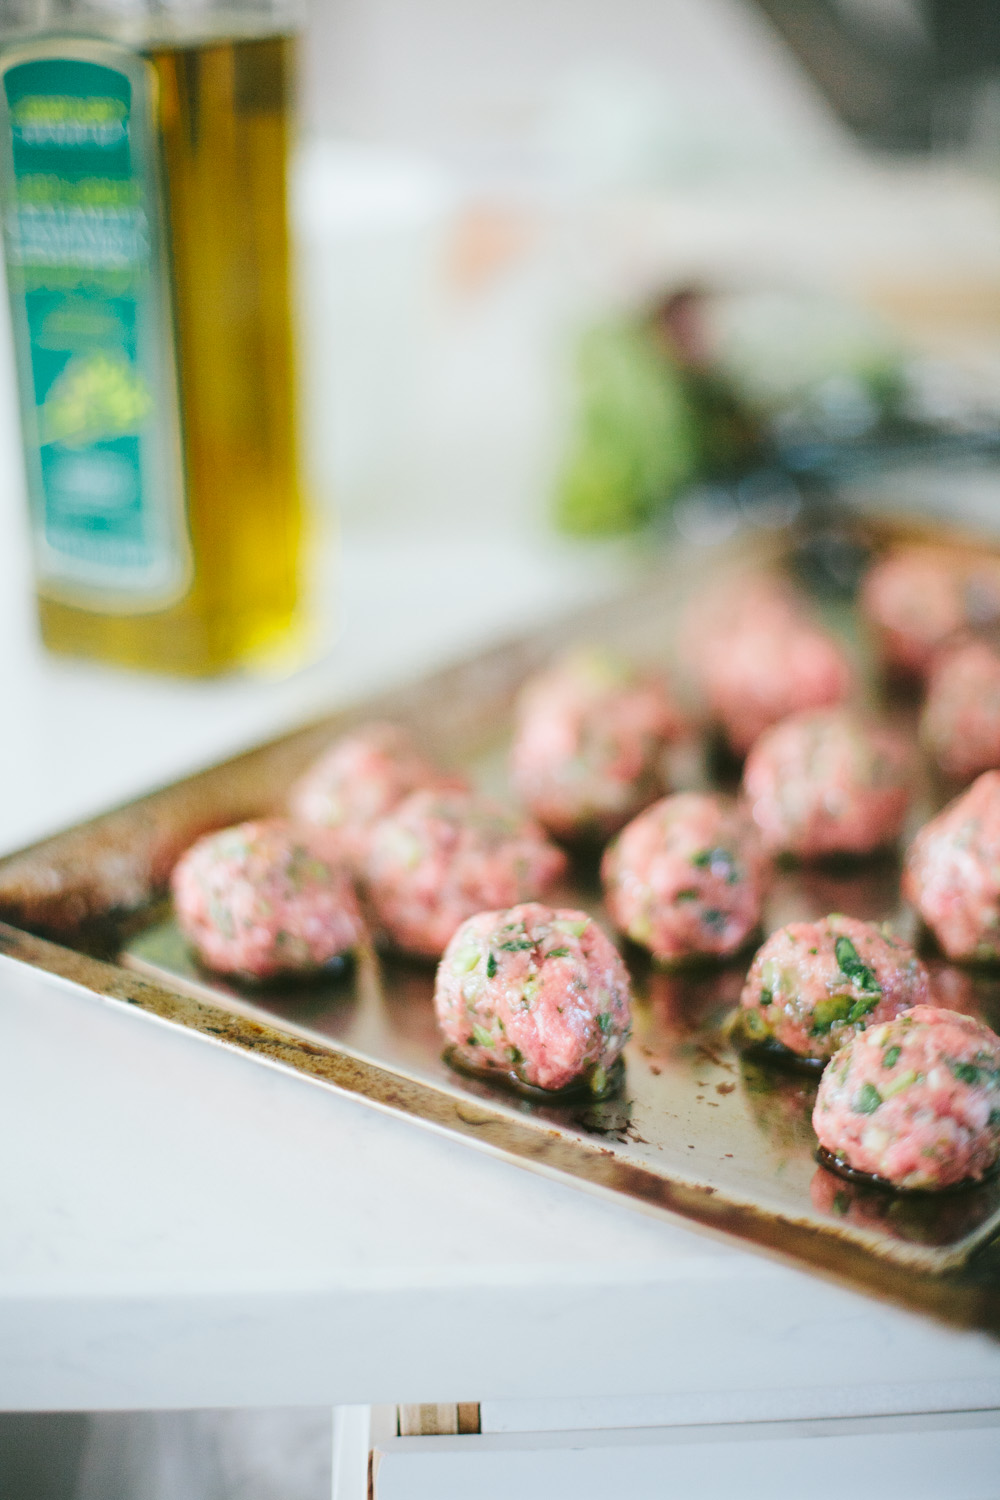 how to make gluten-free meatballs